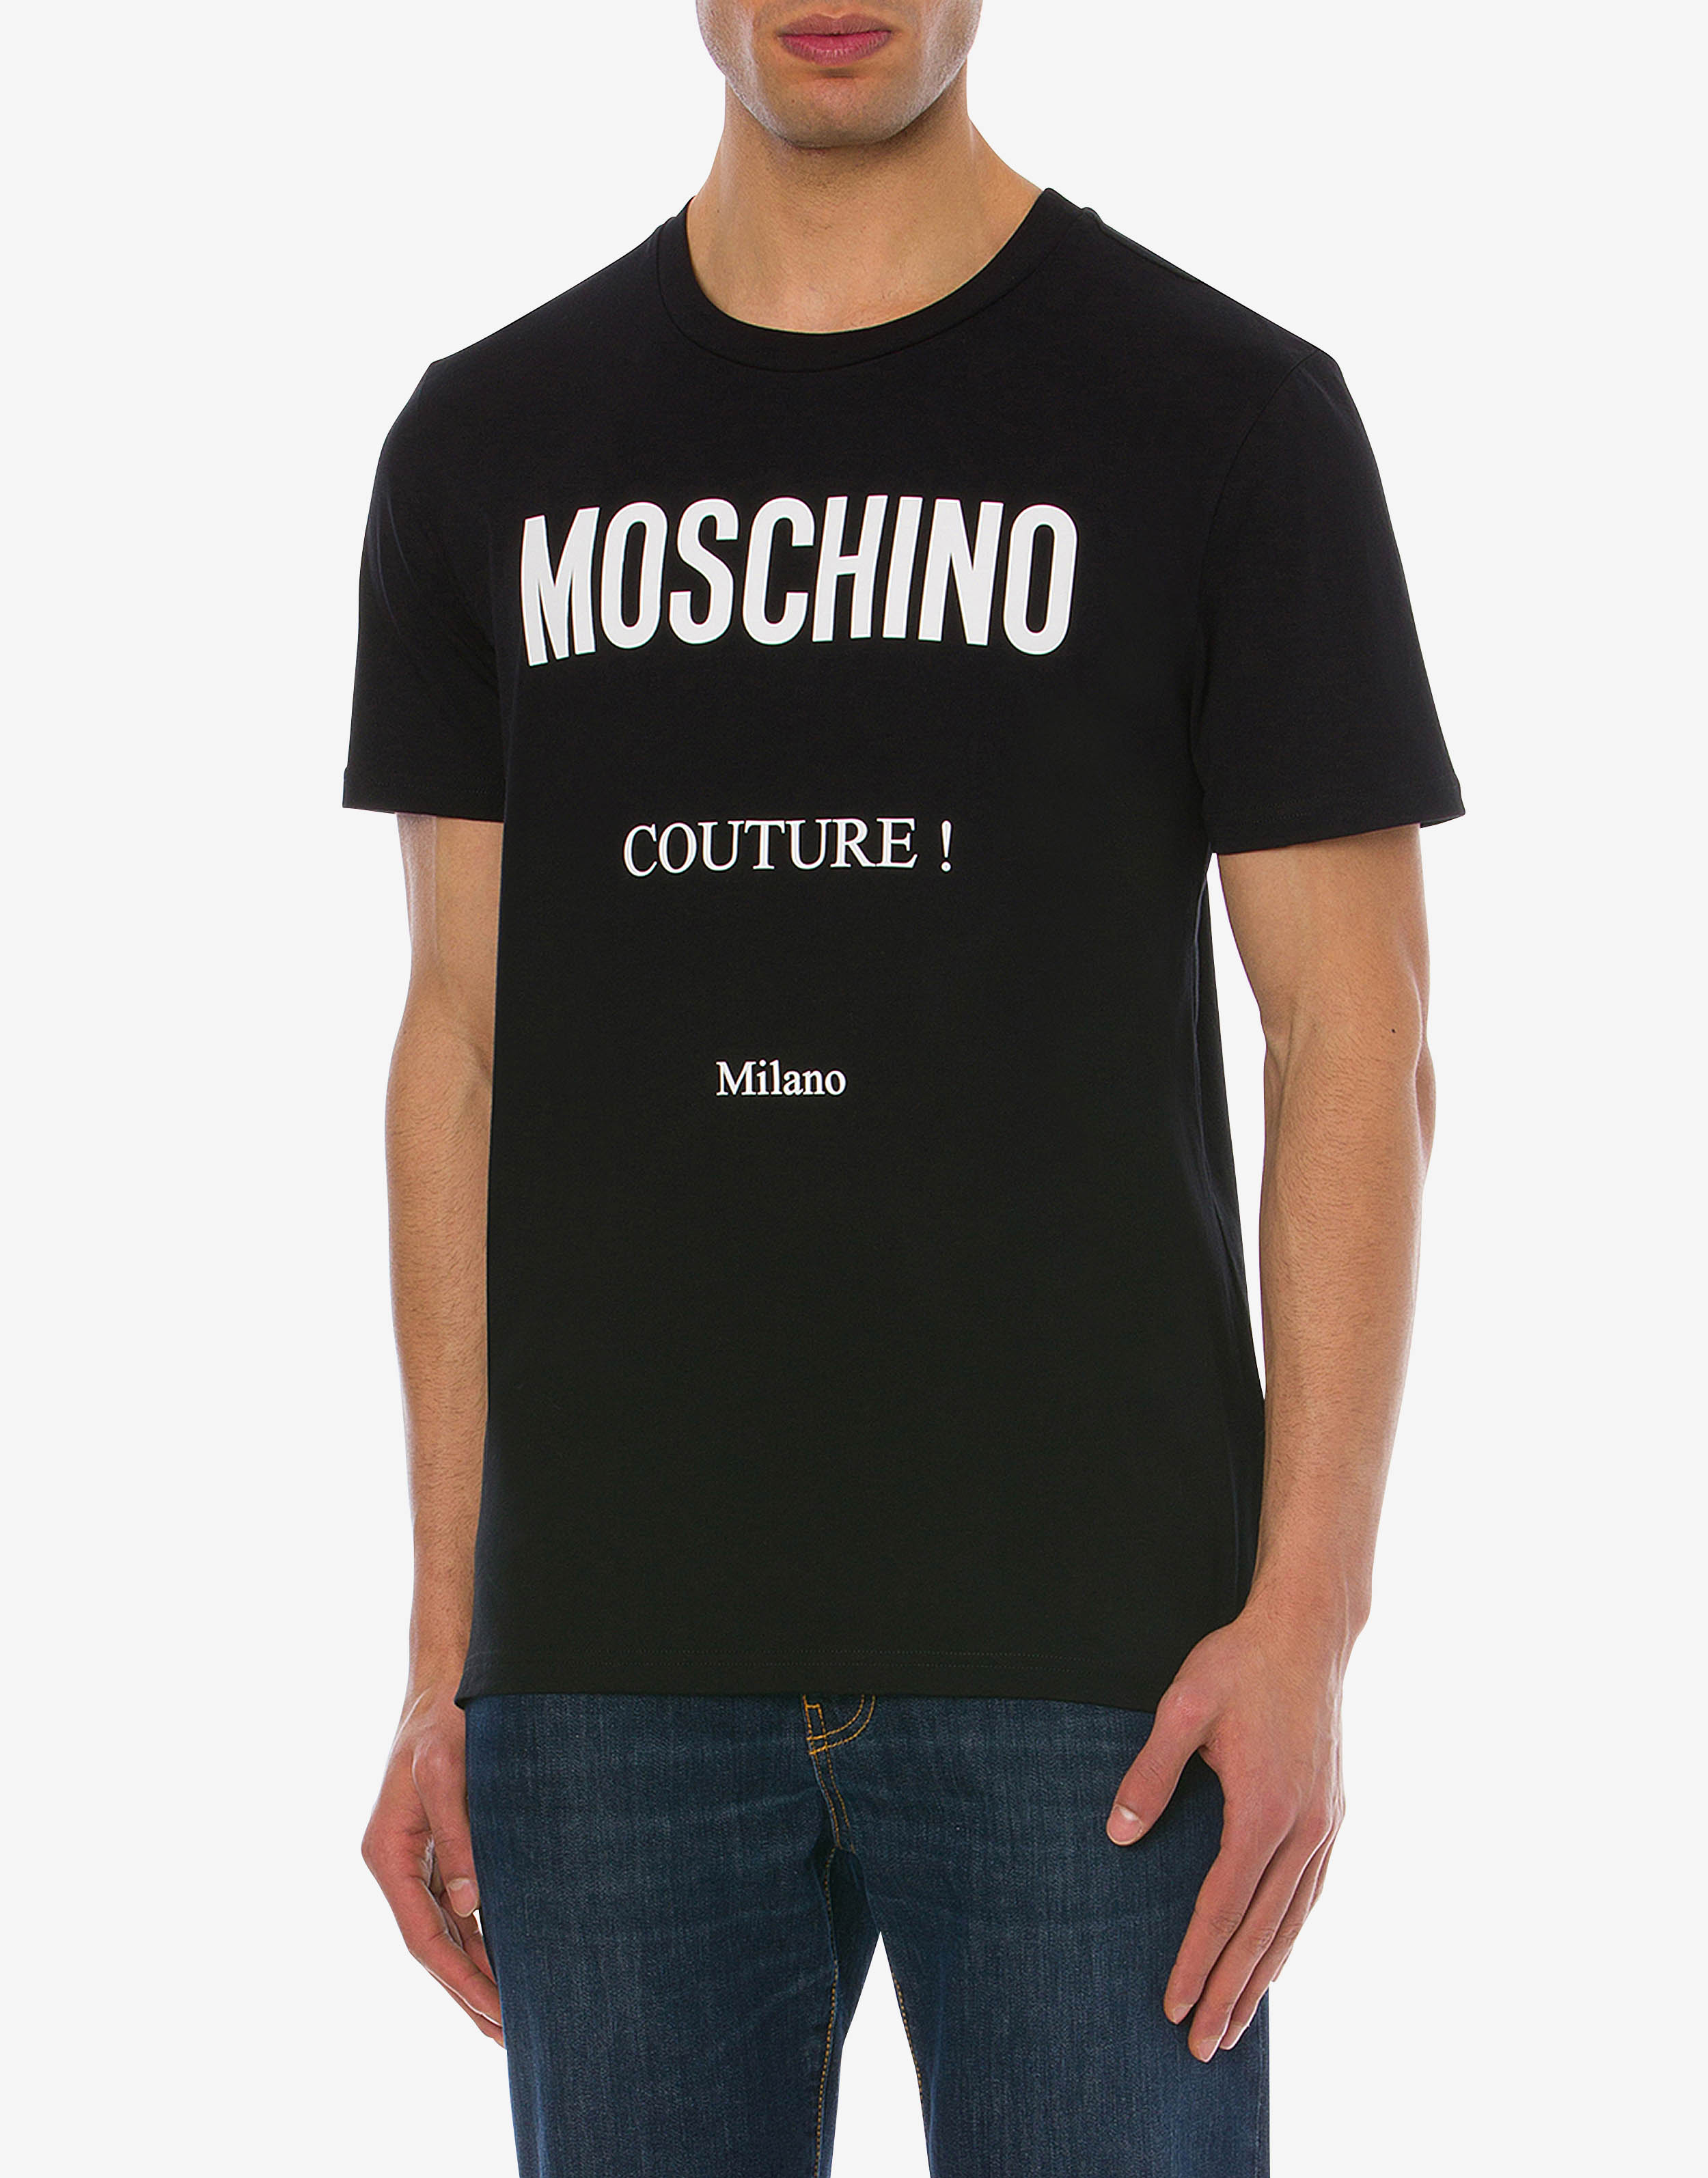 Moschino Moschino t-shirt Official Store Couture Jersey |